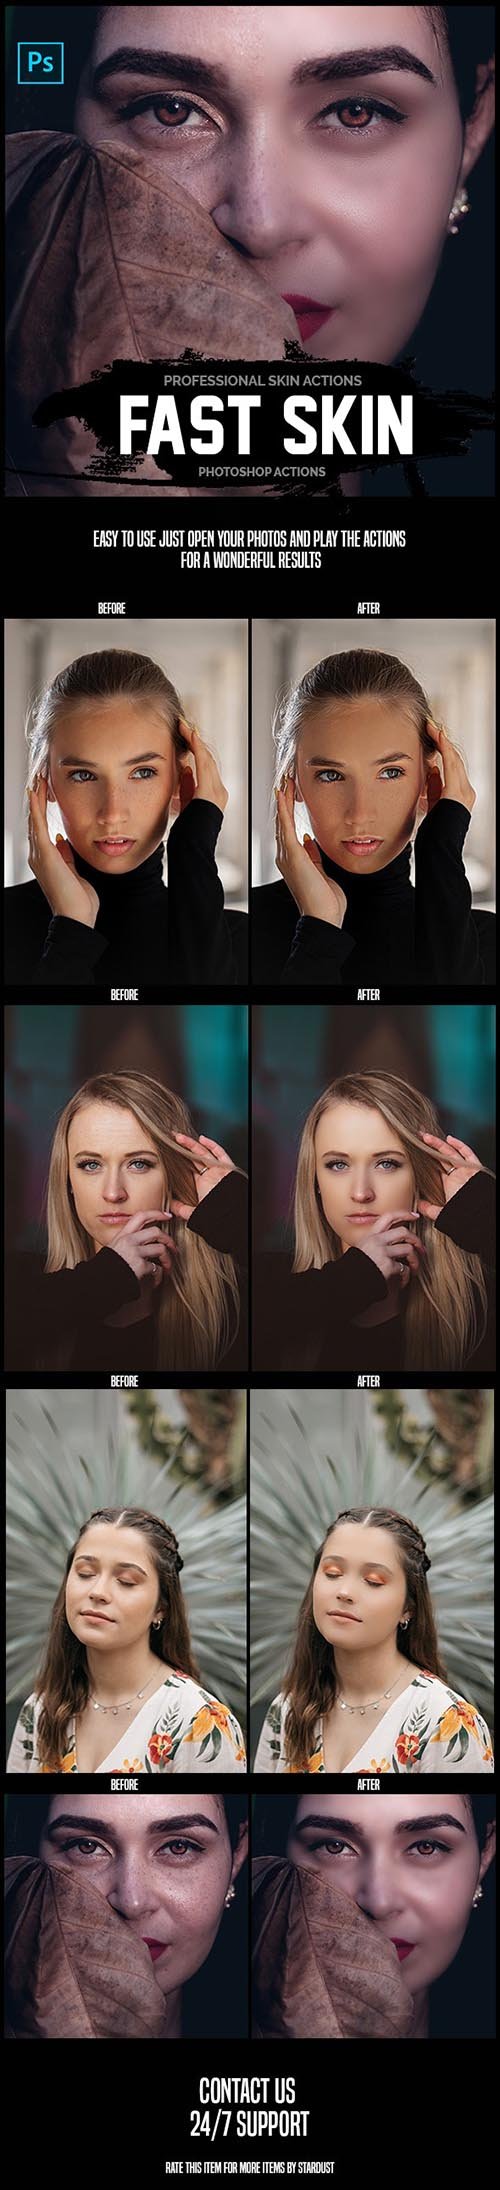 Fast Skin - Professional Photoshop Actions 26154963